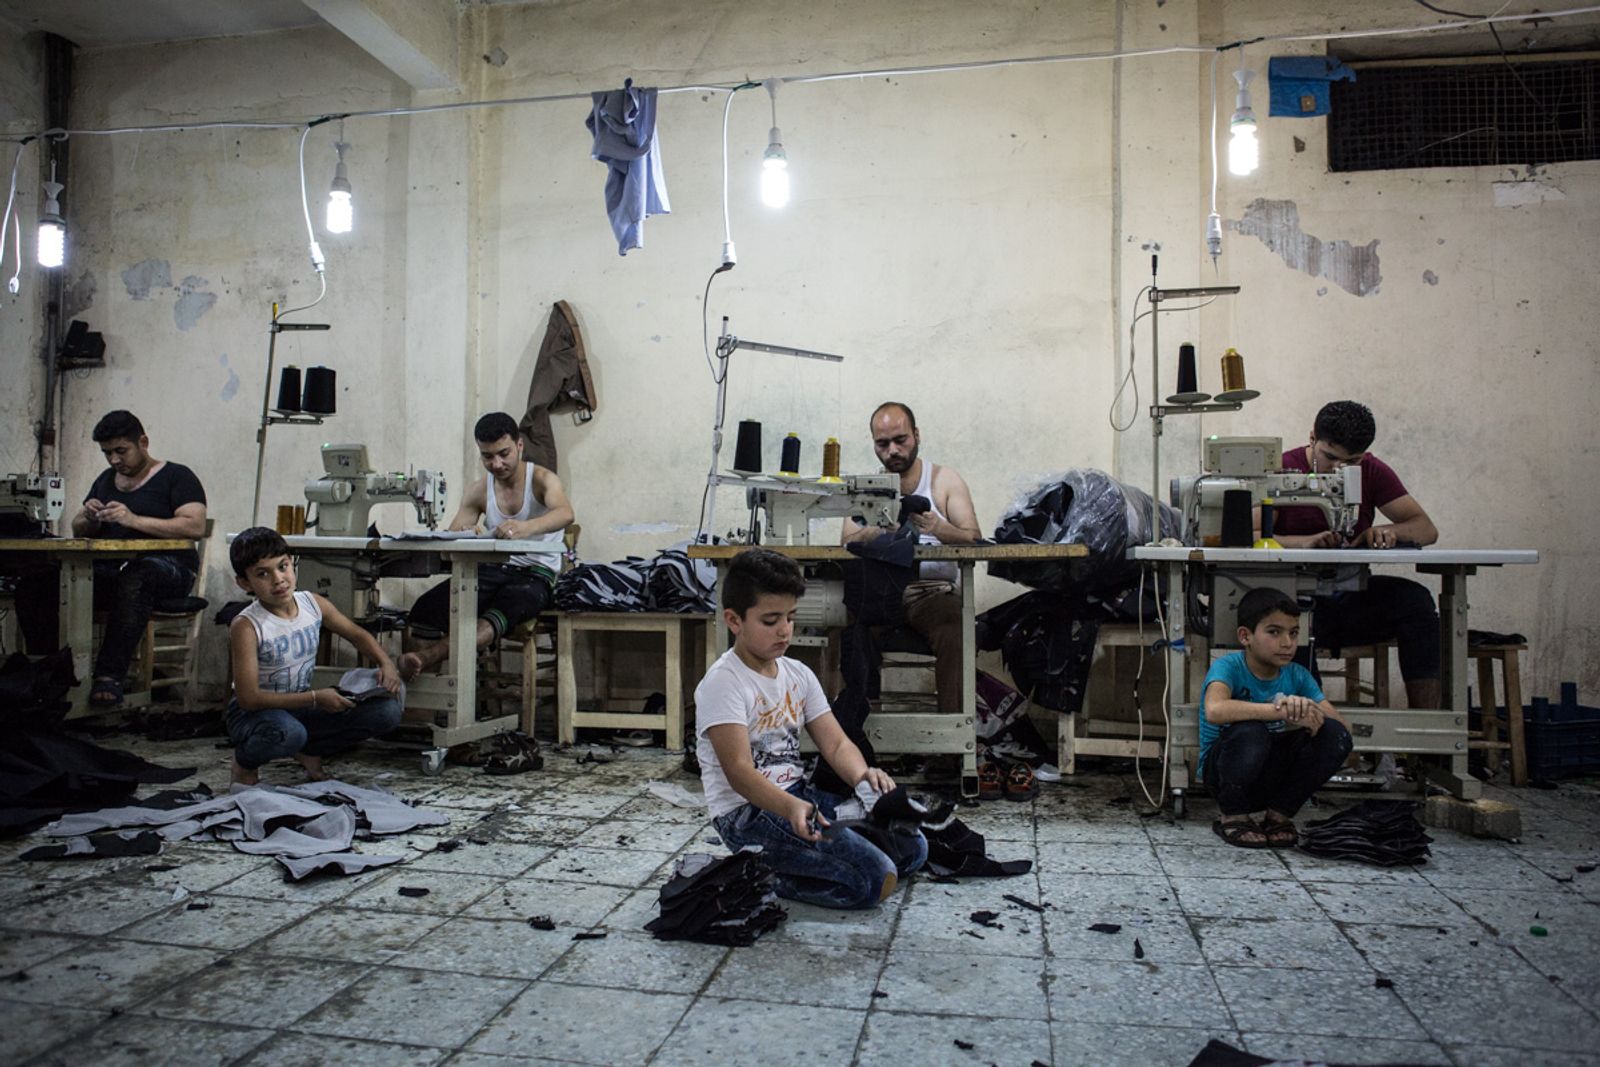 © Valerio Muscella - Syrian children work more than 8 hours a day in a Turkish textile workshop. Gaziantep, Turkey. May 2016.